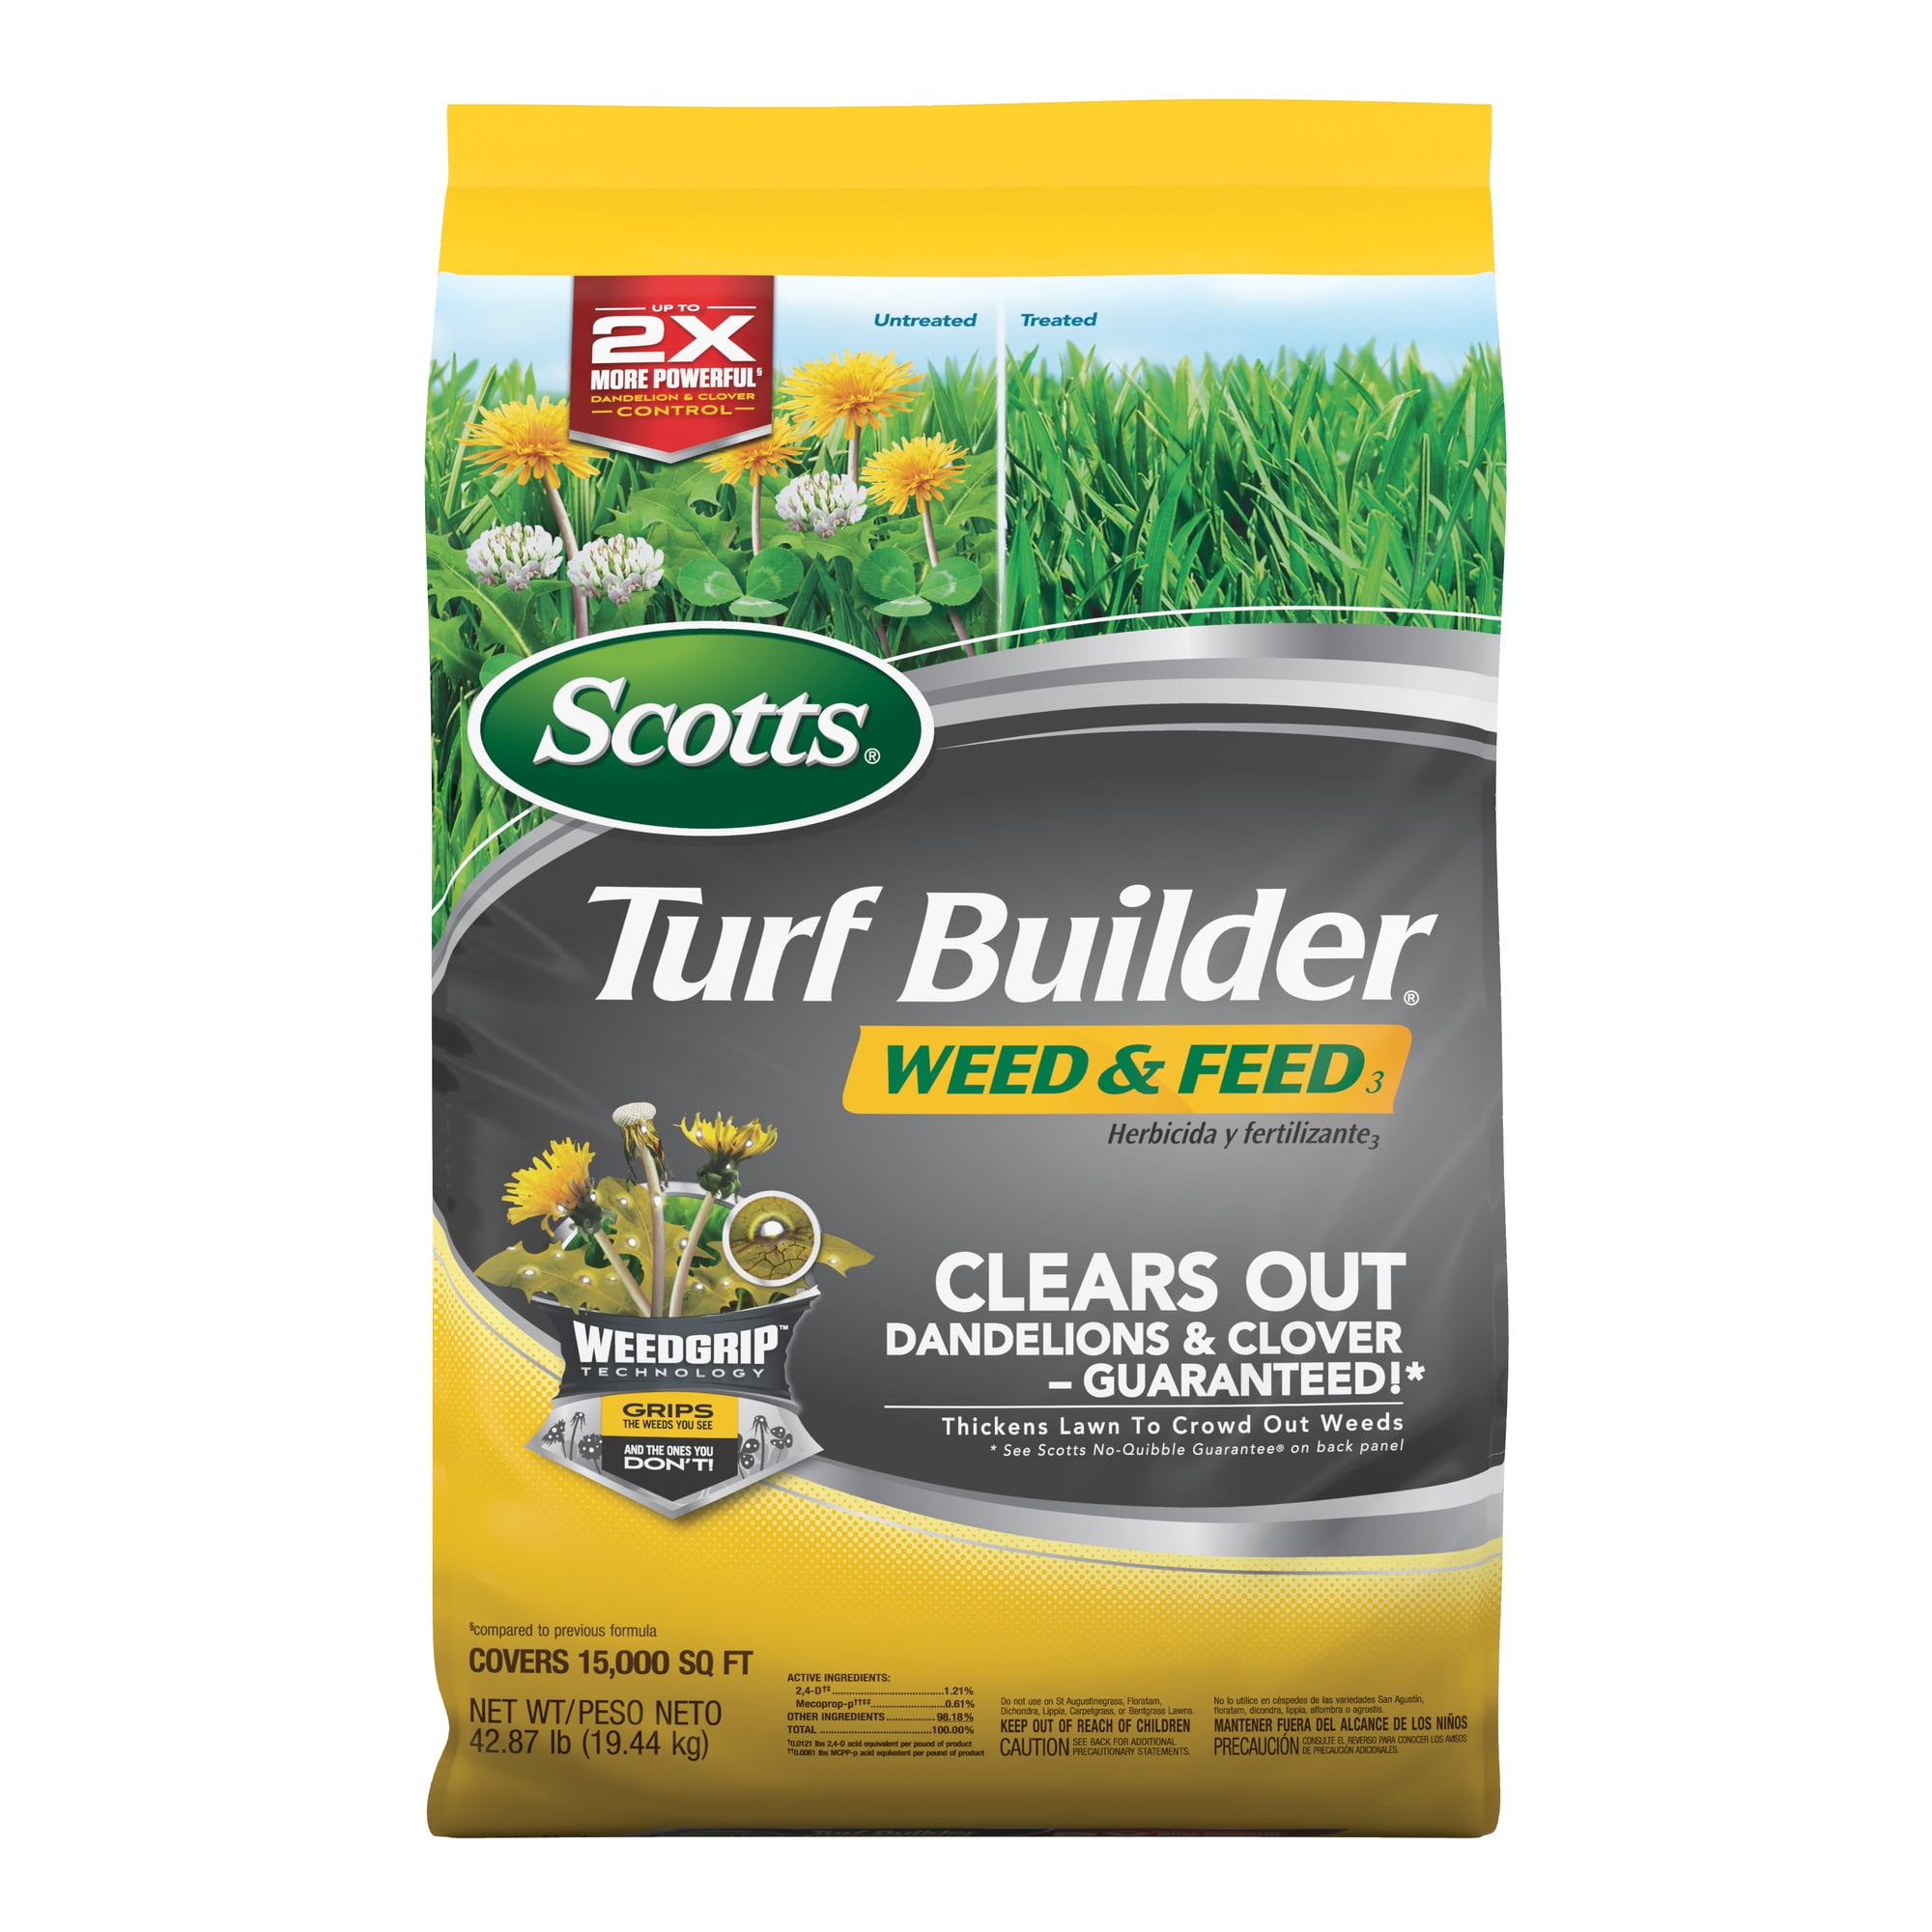 Scotts Turf Builder Weed & Feed 3, 43.07 lbs., up to 15,000 sq. ft.